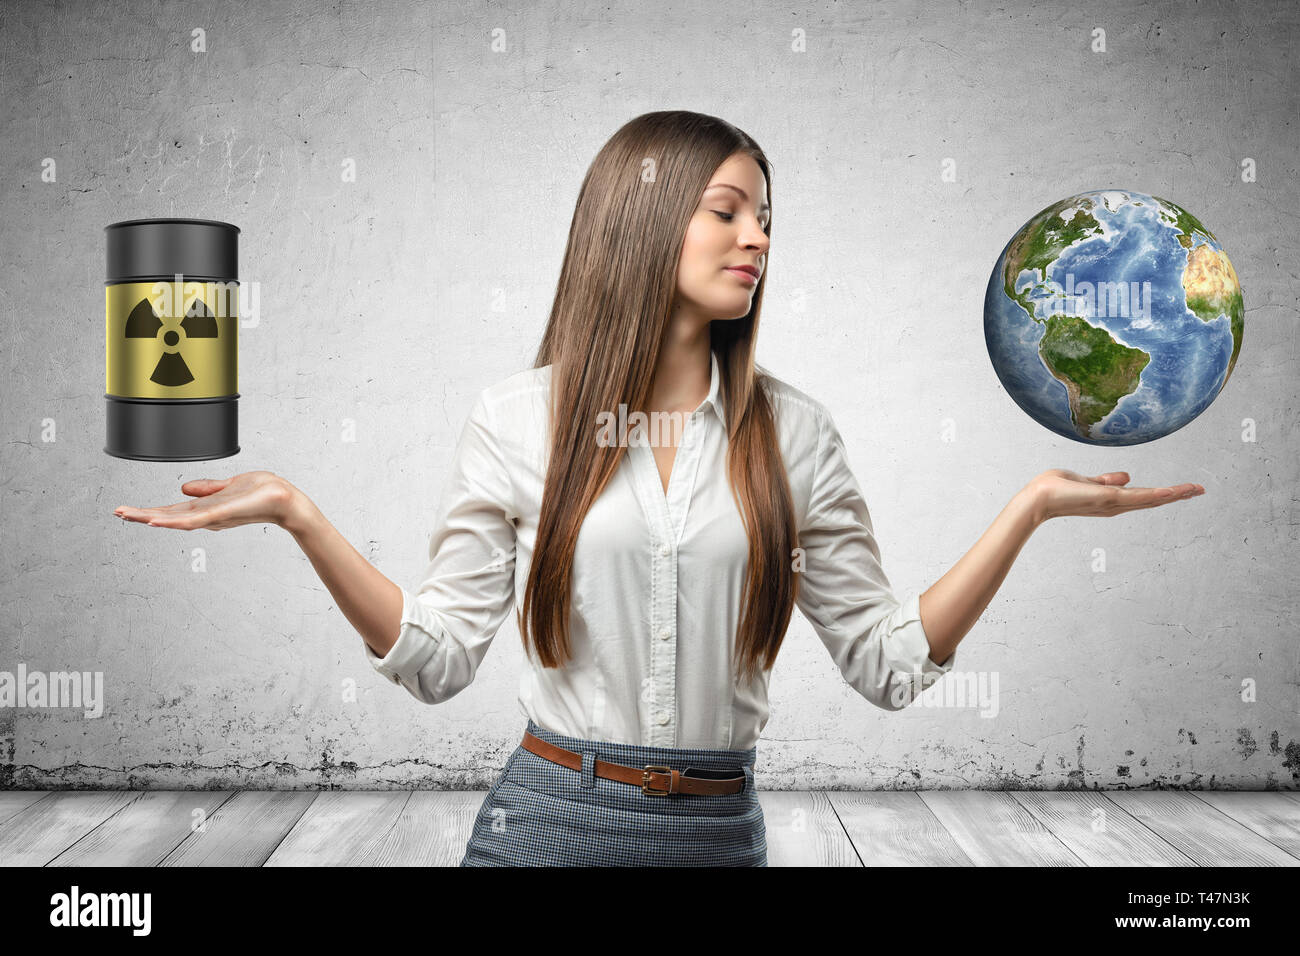 Businesswoman with hands to the side facing up, with barrel with ionizing radiation sign on it and small Earth, suspended in air above her palms. Stock Photo